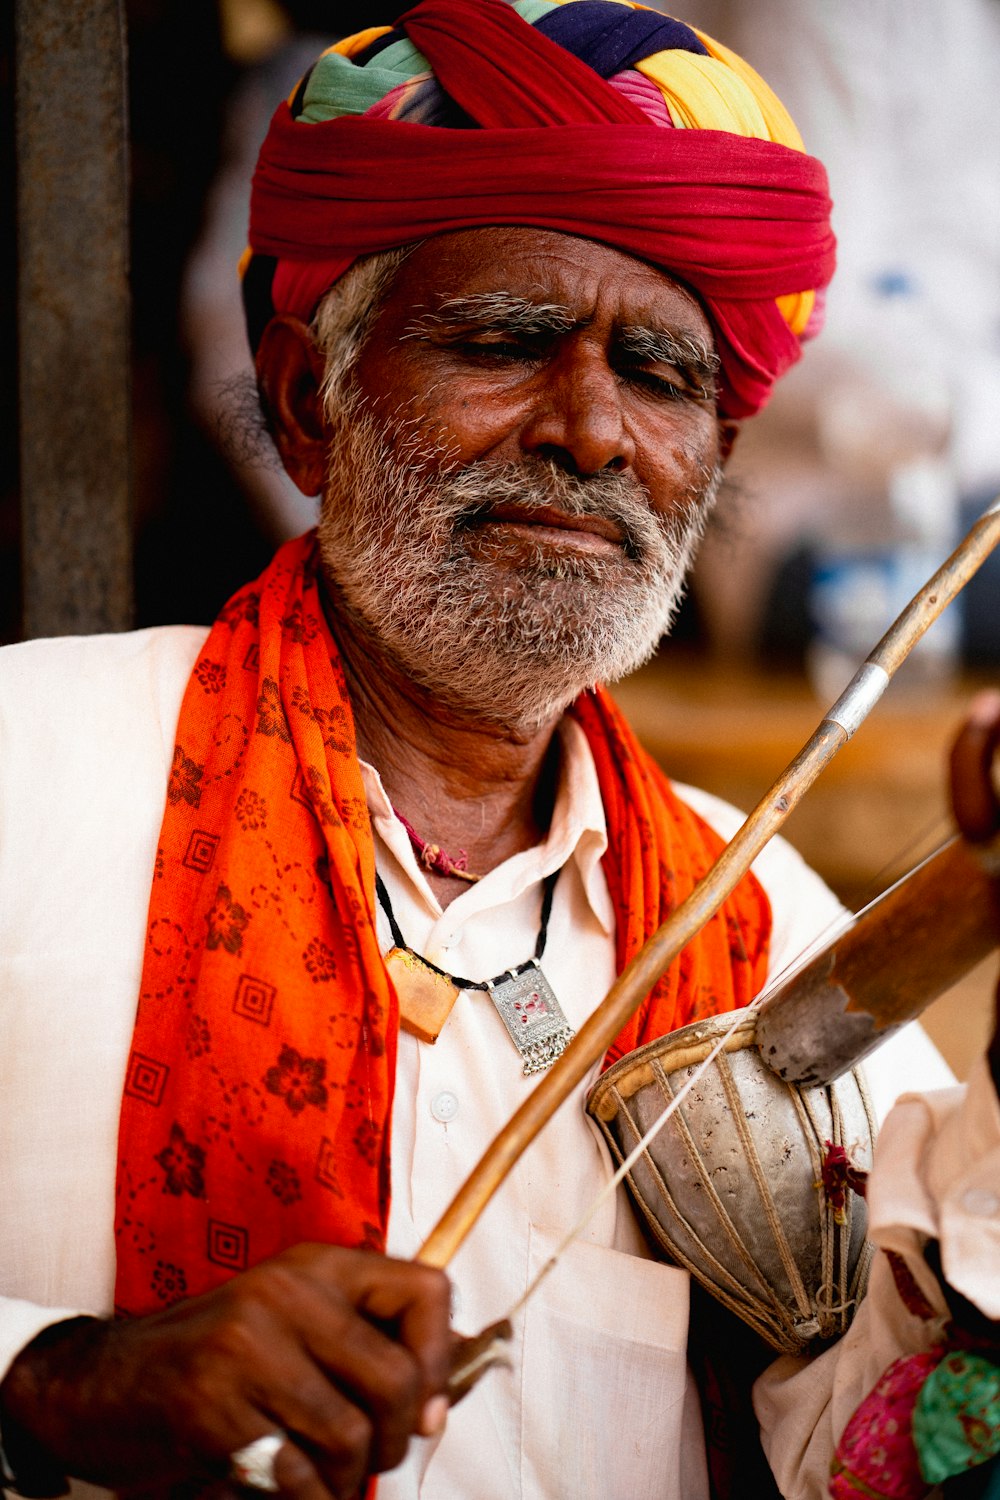 a man wearing a red turban and holding a wooden instrument